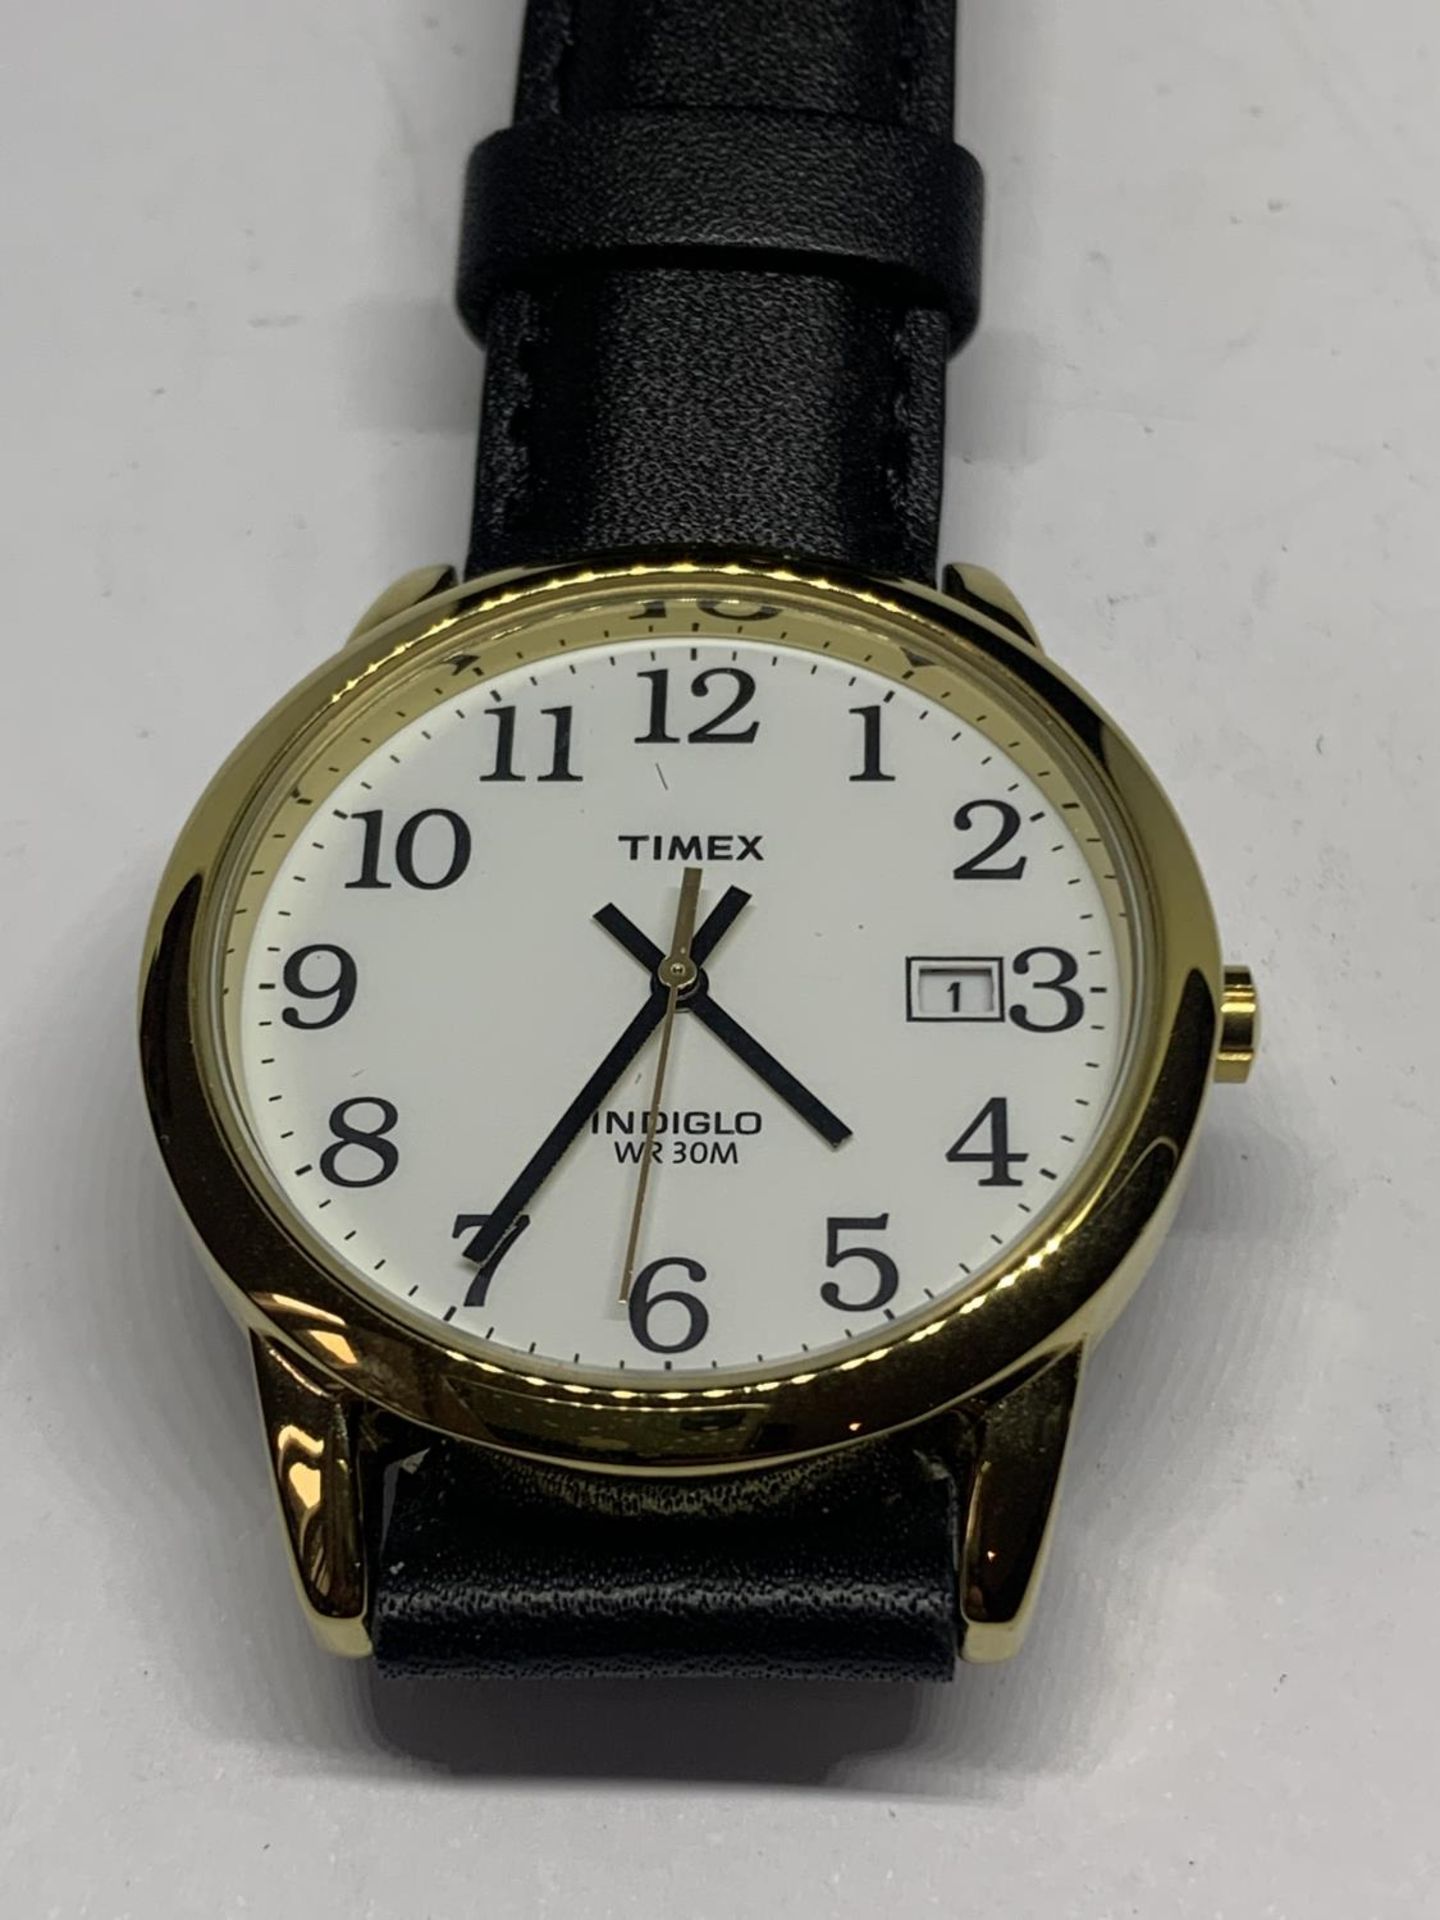 A TIMES INDIGLO WRIST WATCH SEEN WORKING BUT NO WARRANTY - Image 2 of 3